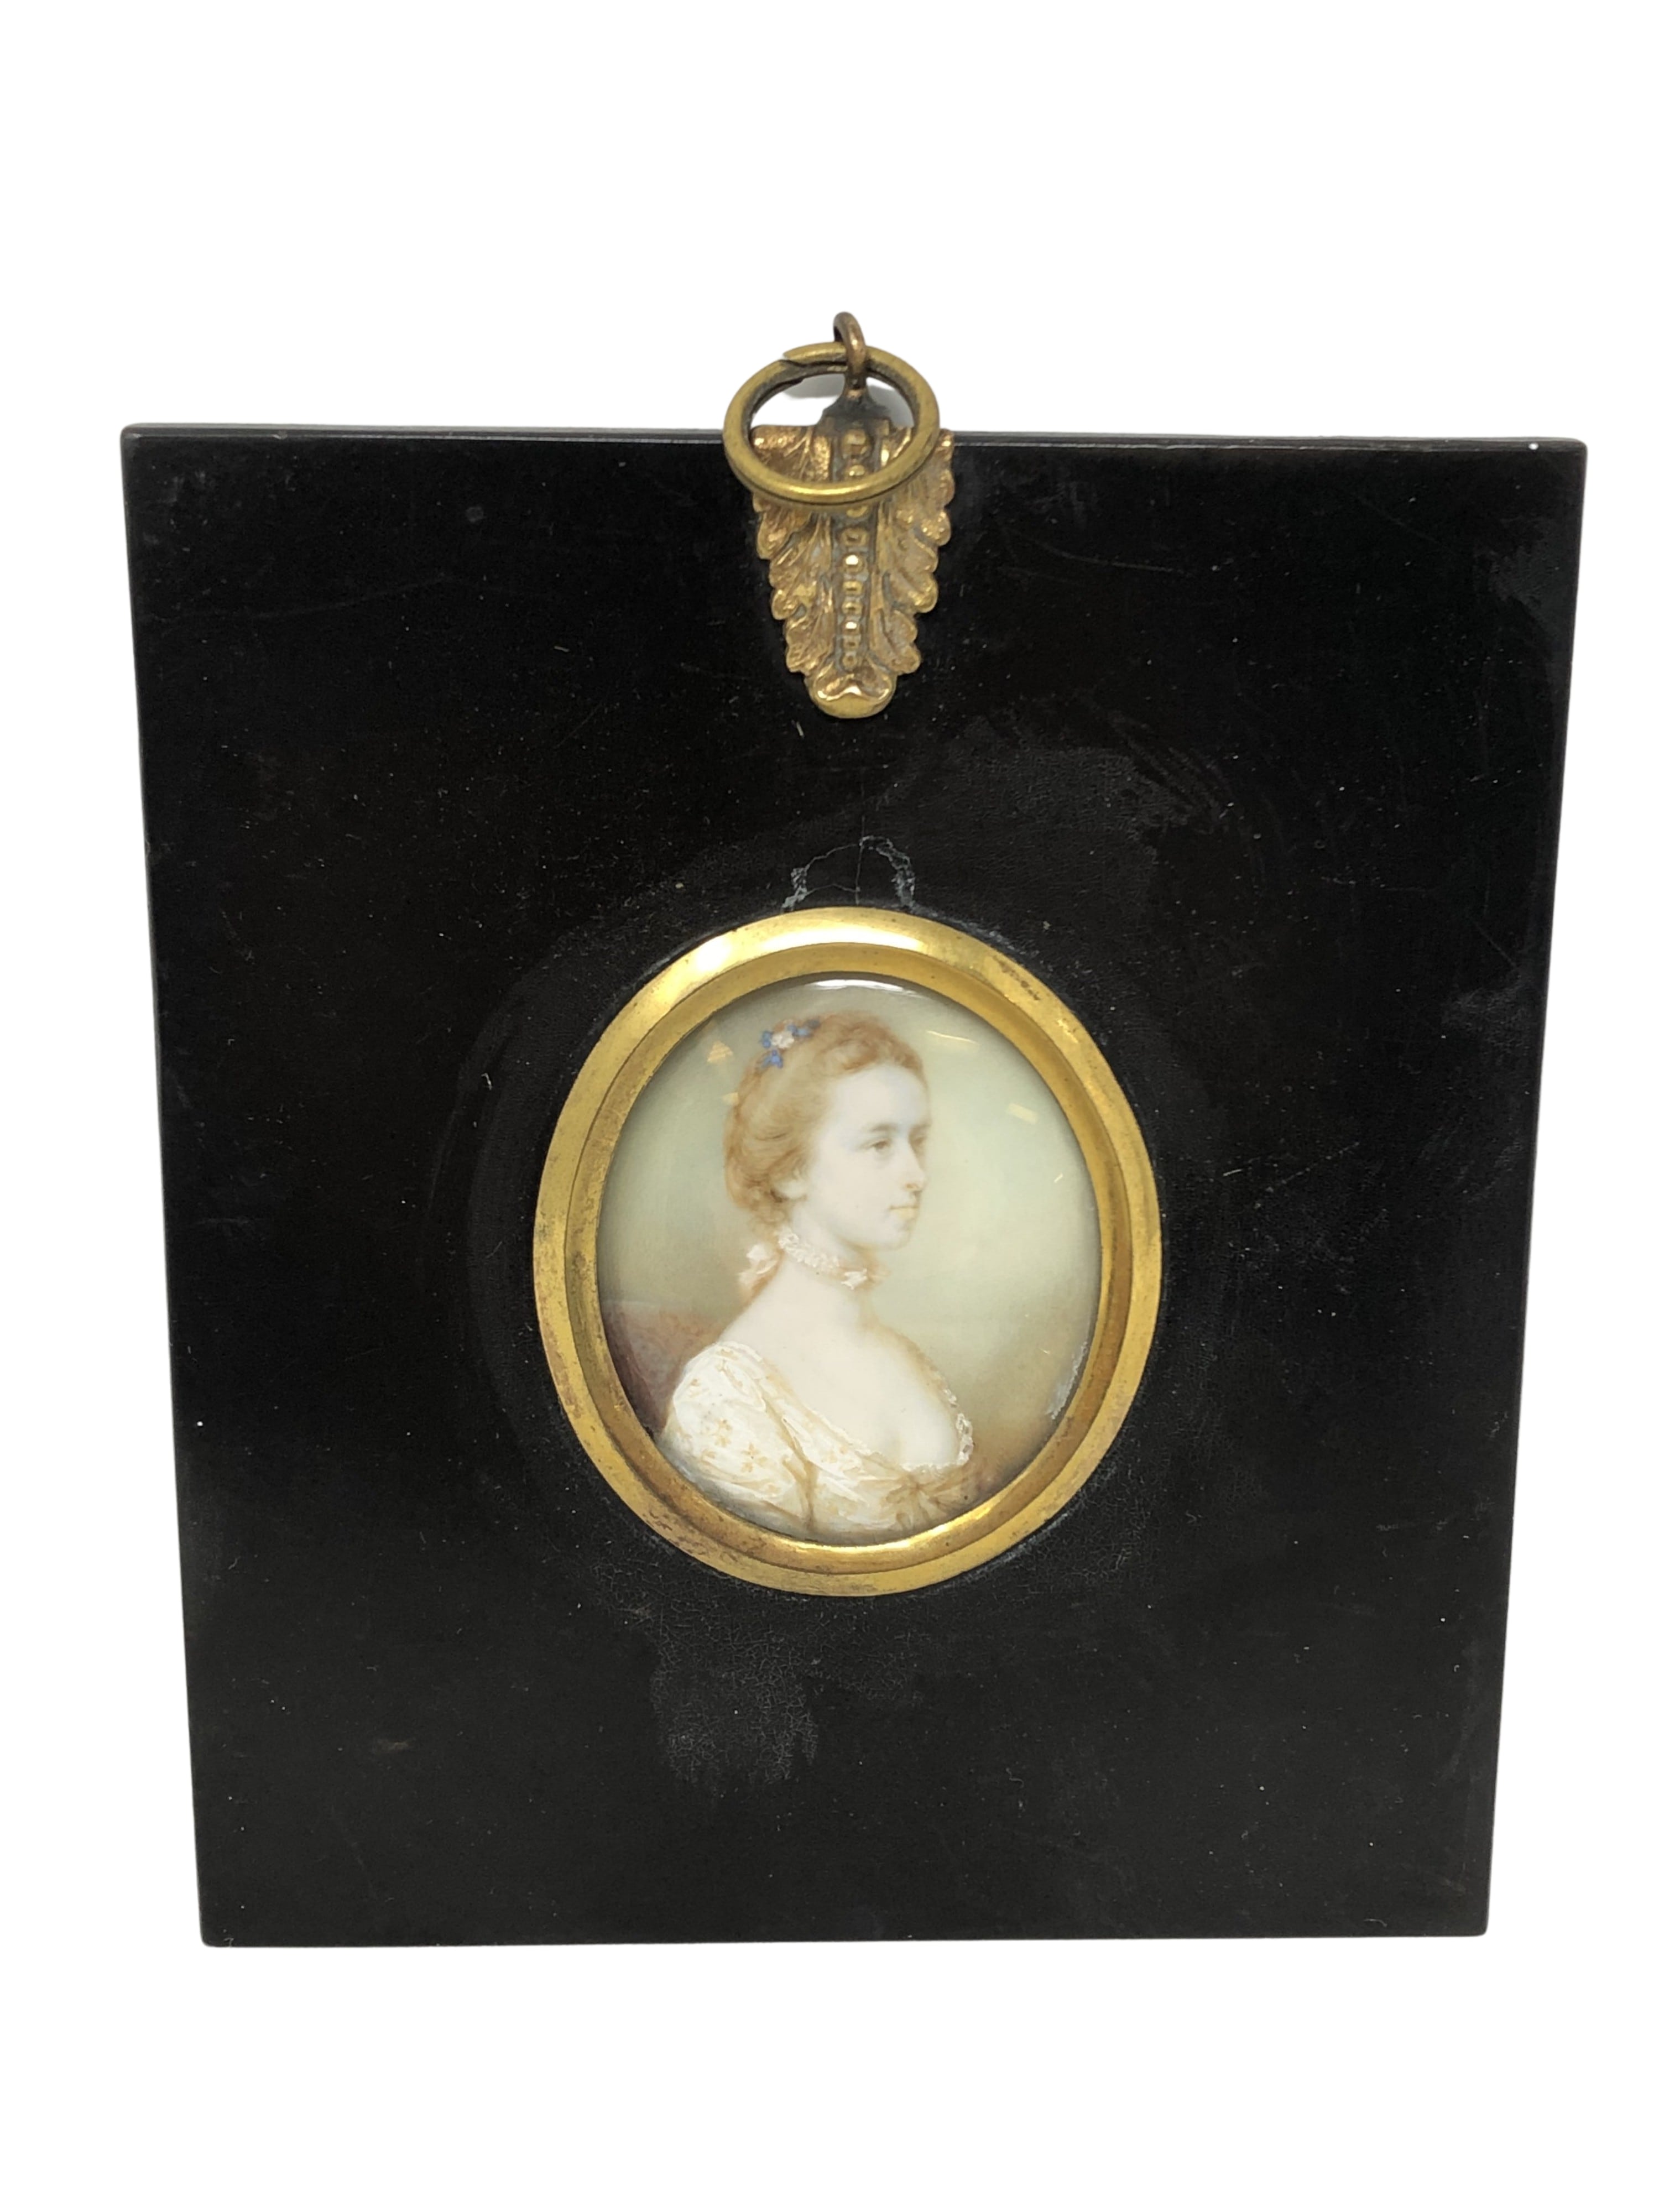 An early 19th century portrait miniature depicting a lady with blue ribbon in her hair, 4.5 cm x 3.